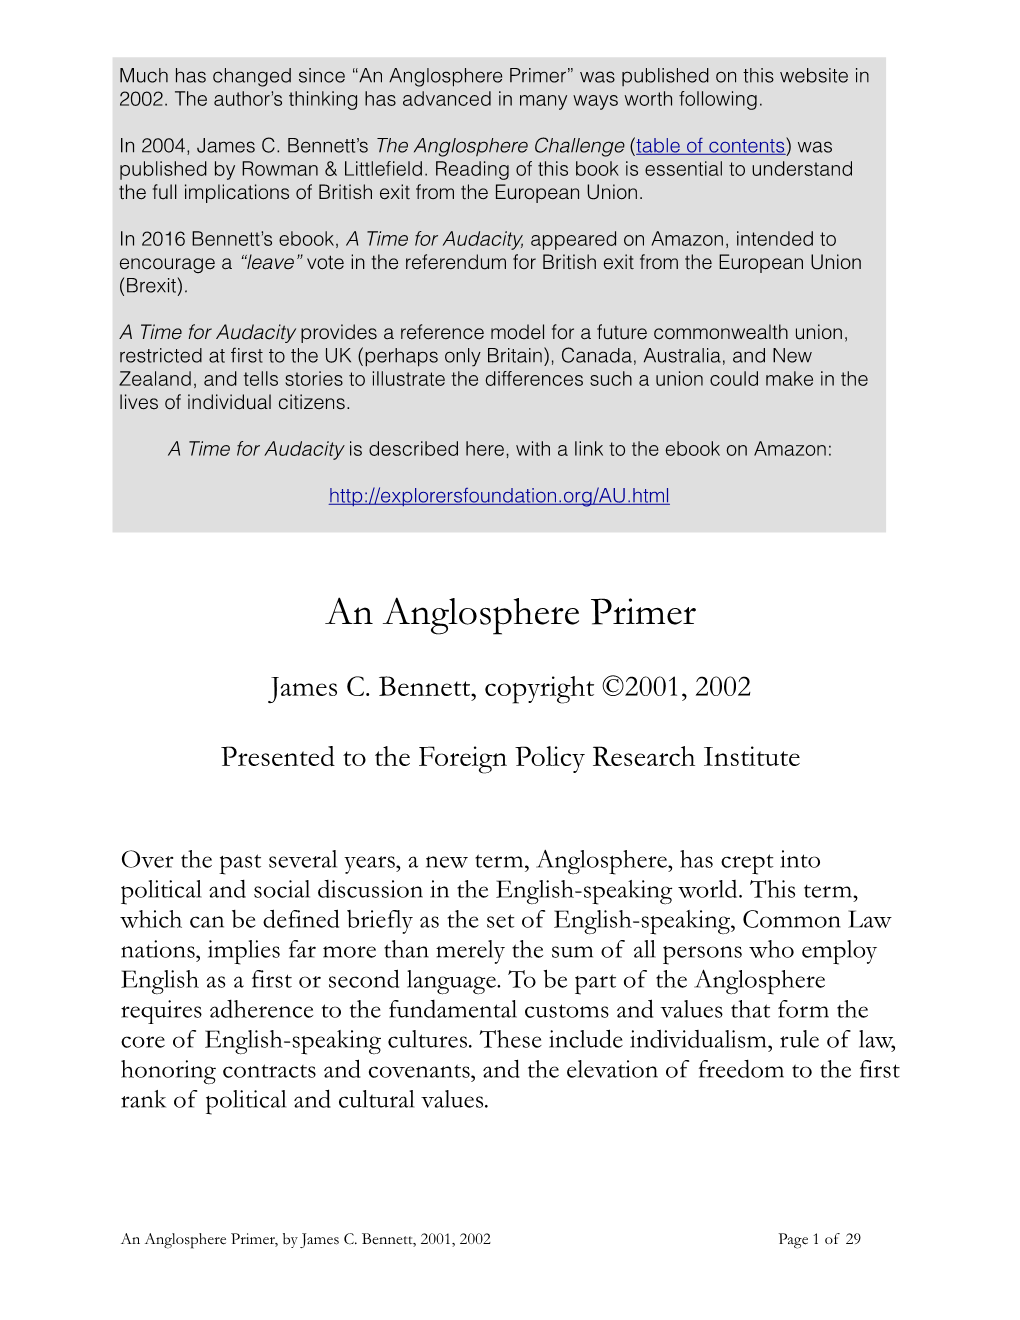 An Anglosphere Primer” Was Published on This Website in 2002